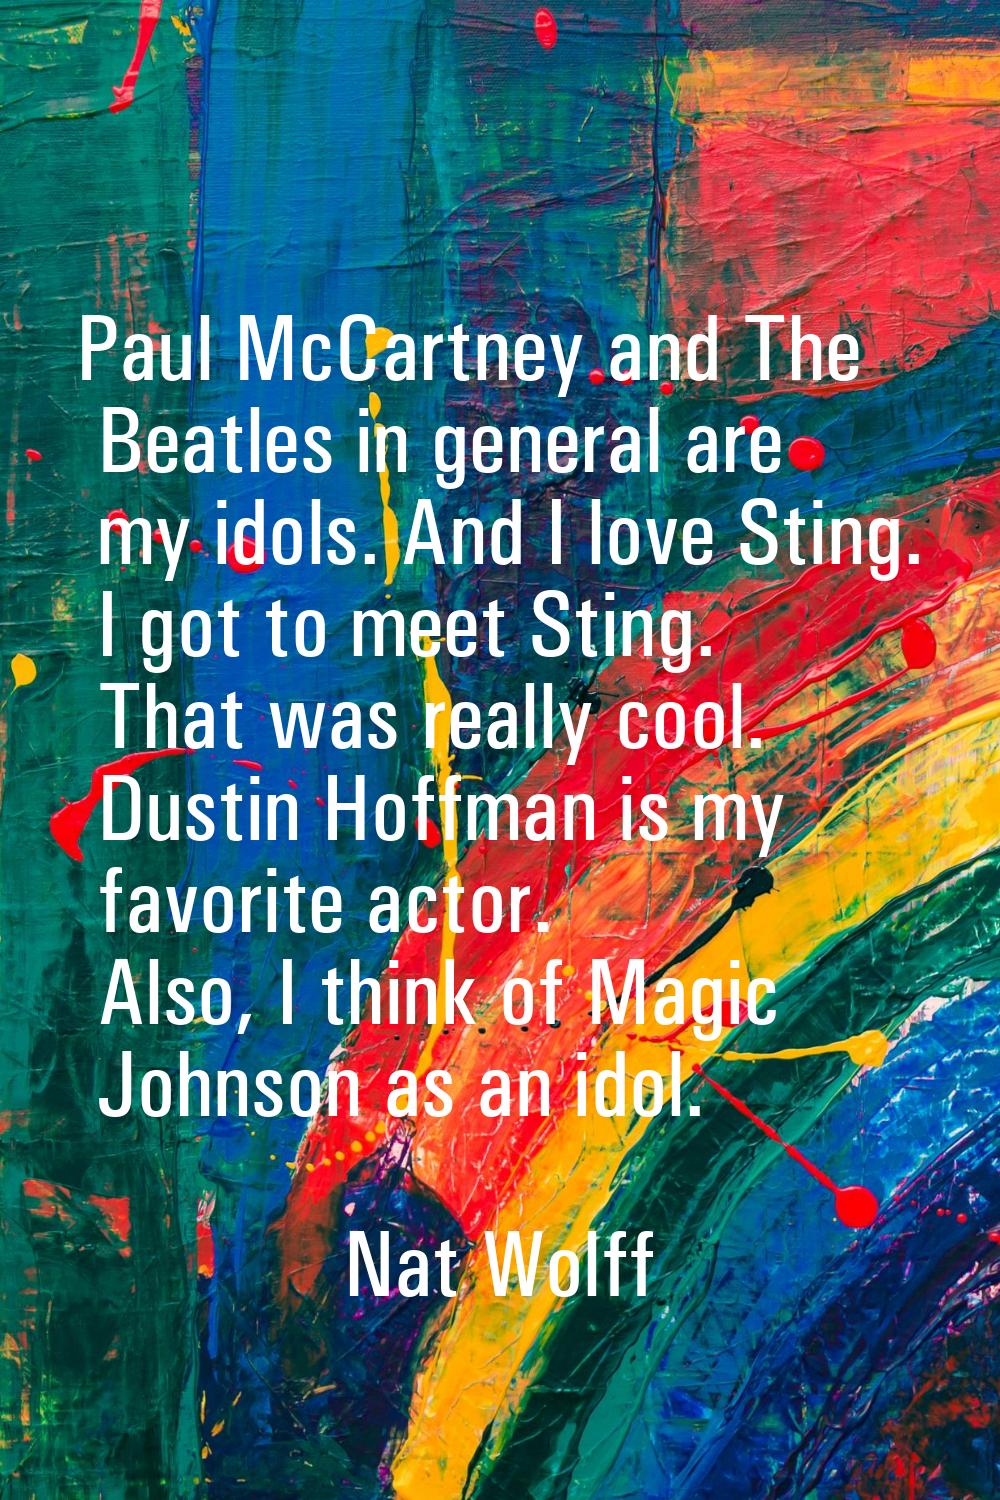 Paul McCartney and The Beatles in general are my idols. And I love Sting. I got to meet Sting. That